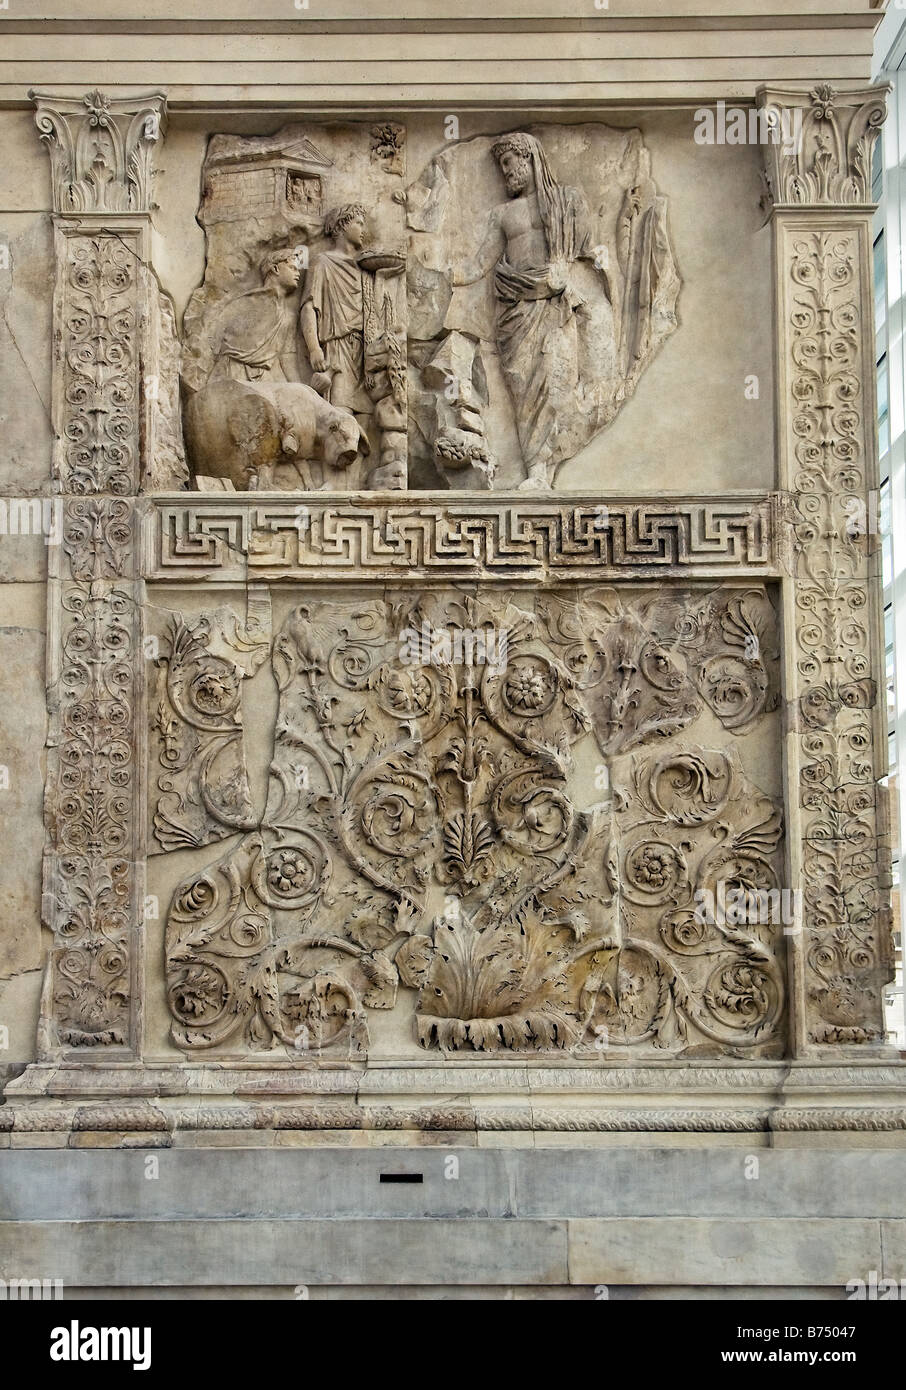 Roman altar of the Ara Pacis in Rome Stock Photo